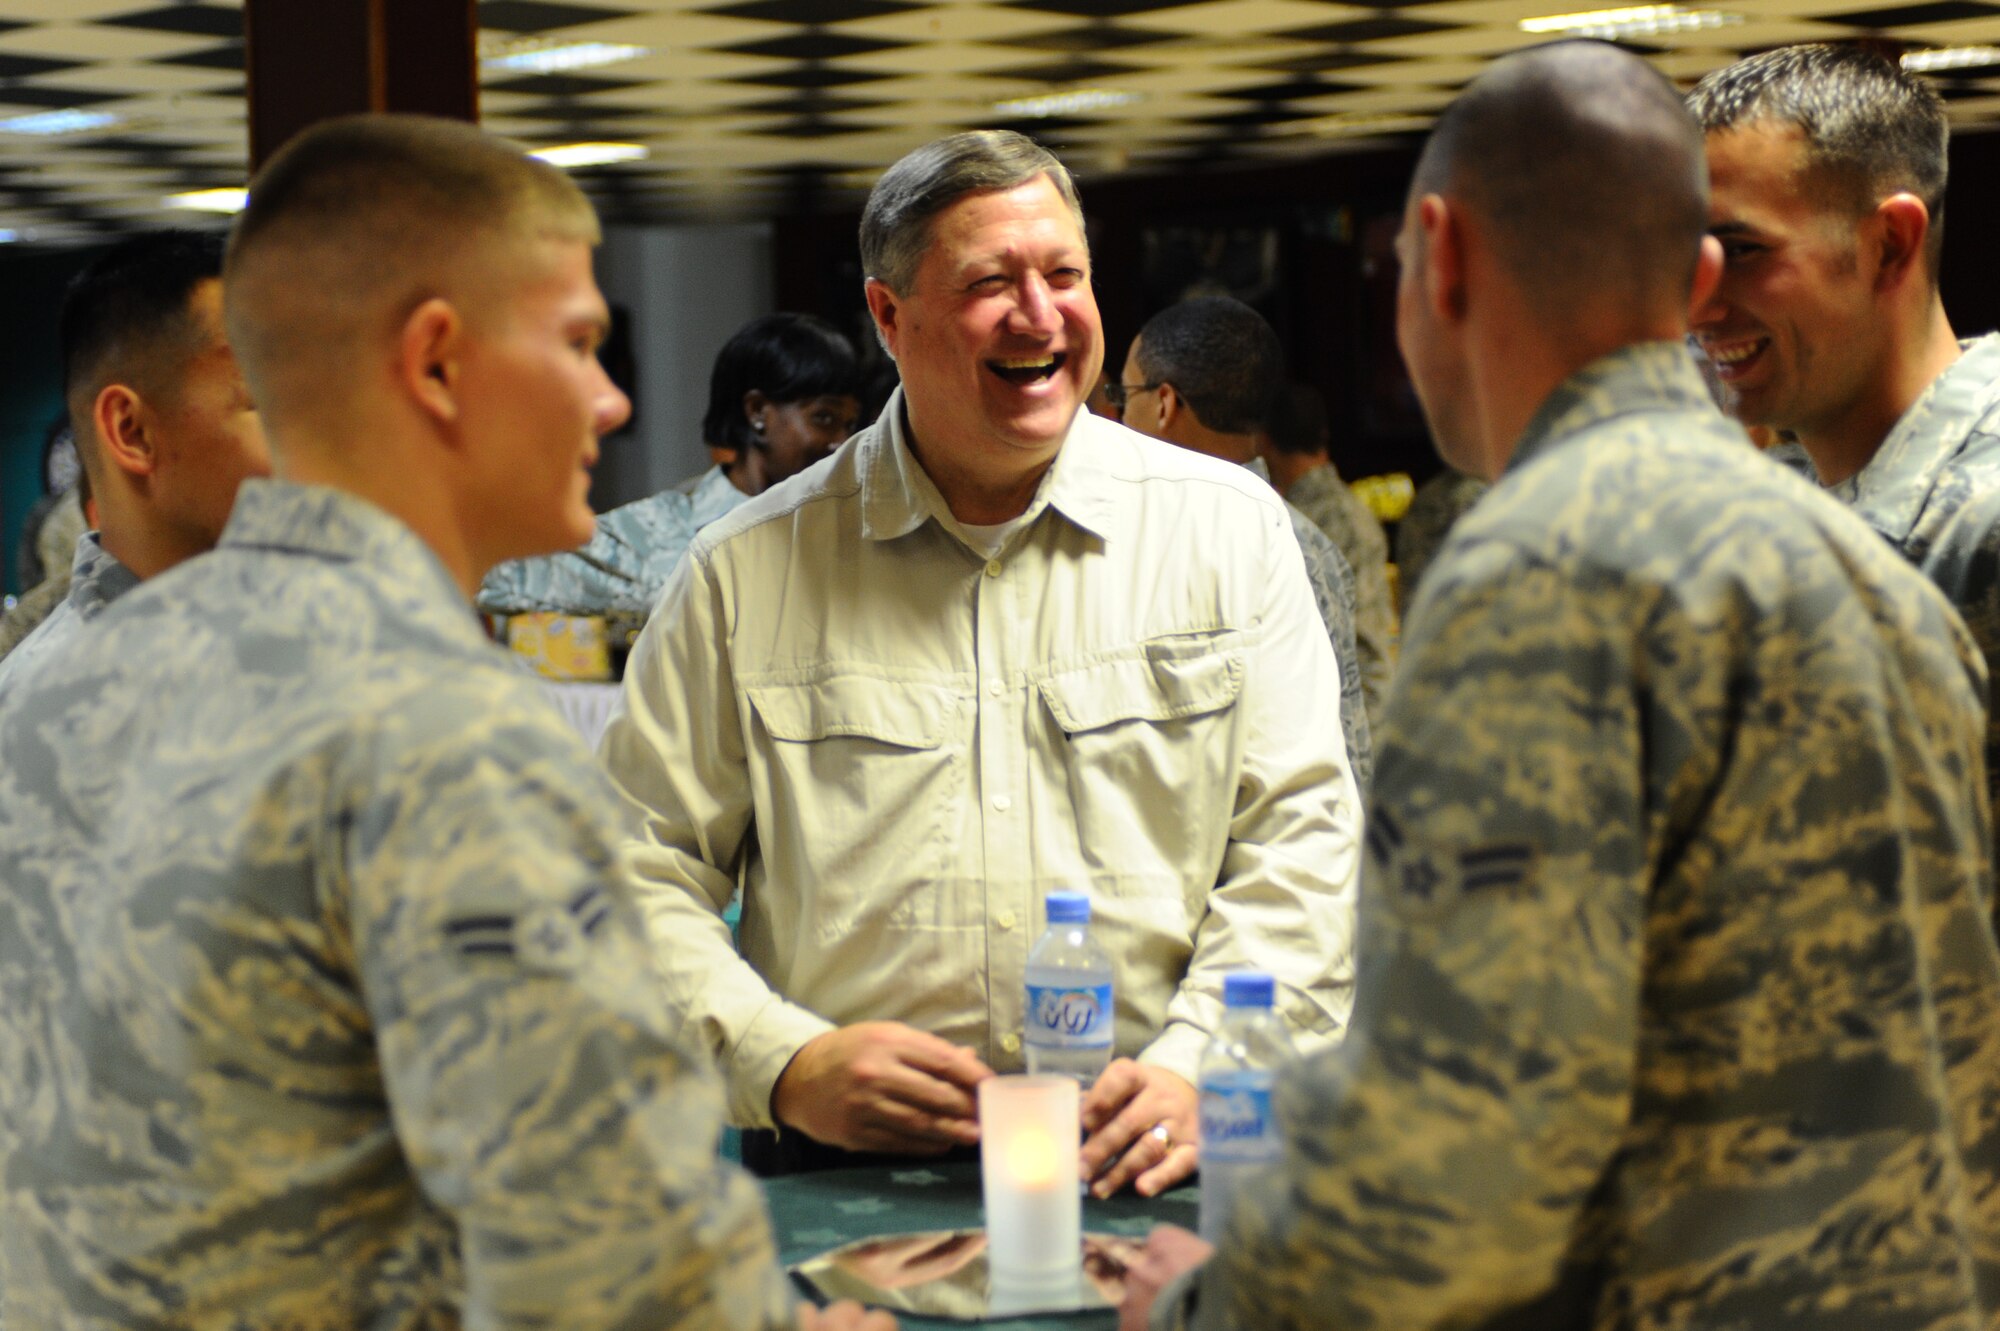 Secretary of the Air Force Michael Donley socializes with 379th Air Expeditionary Wing Airmen during his visit to a non-disclosed Southwest Asia location Jan. 29, 2010. (U.S. Air Force photo by Senior Airman Kasey Zickmund)